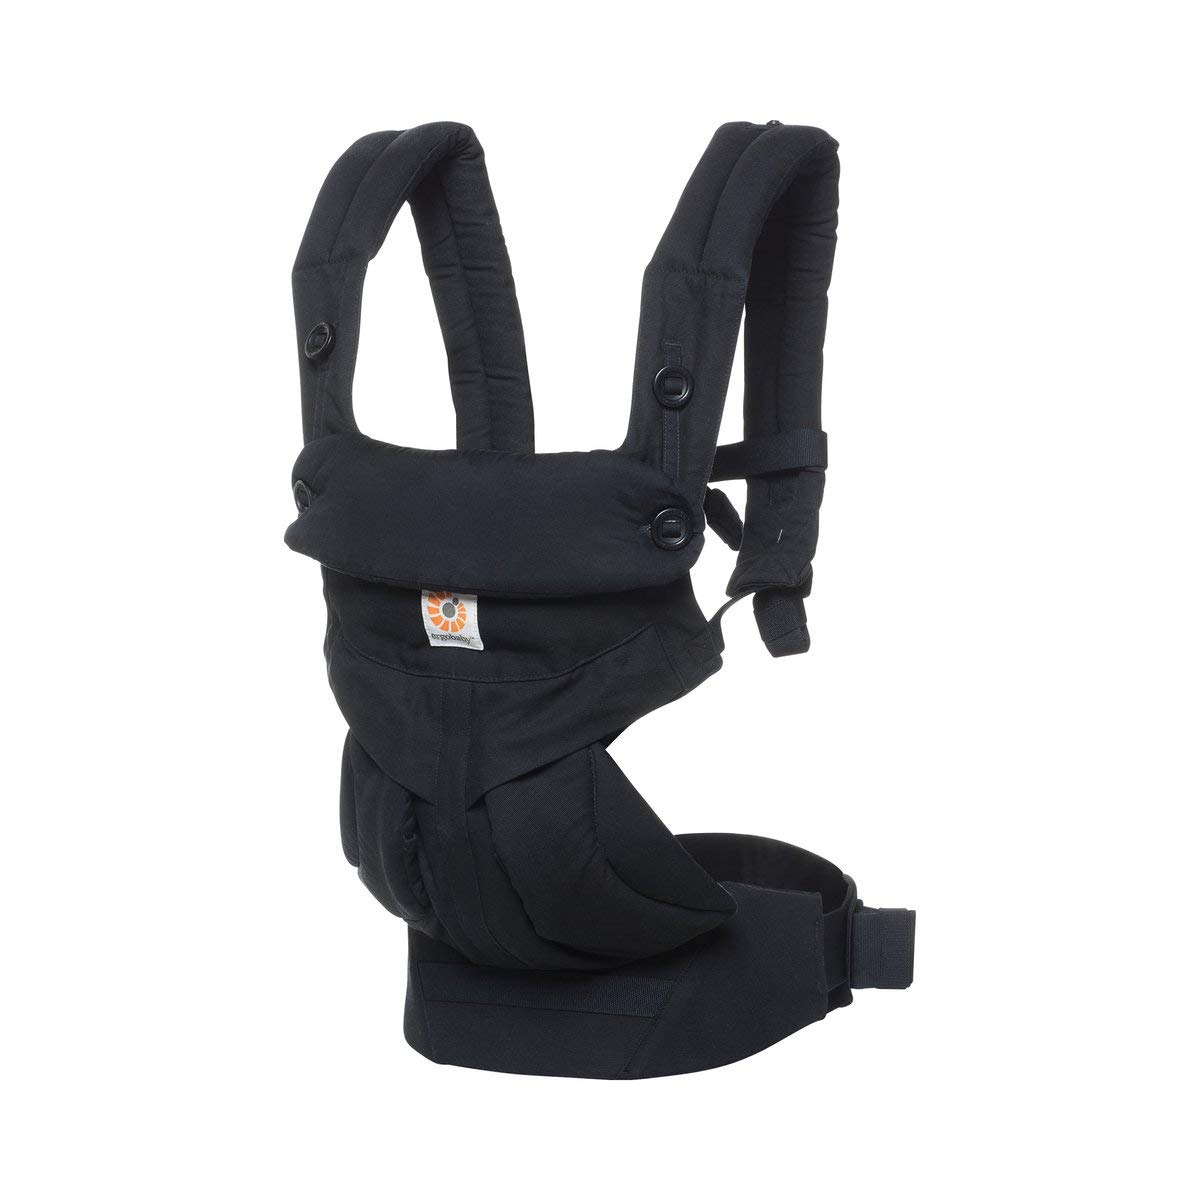 Baby carrier with 4 carrying positions